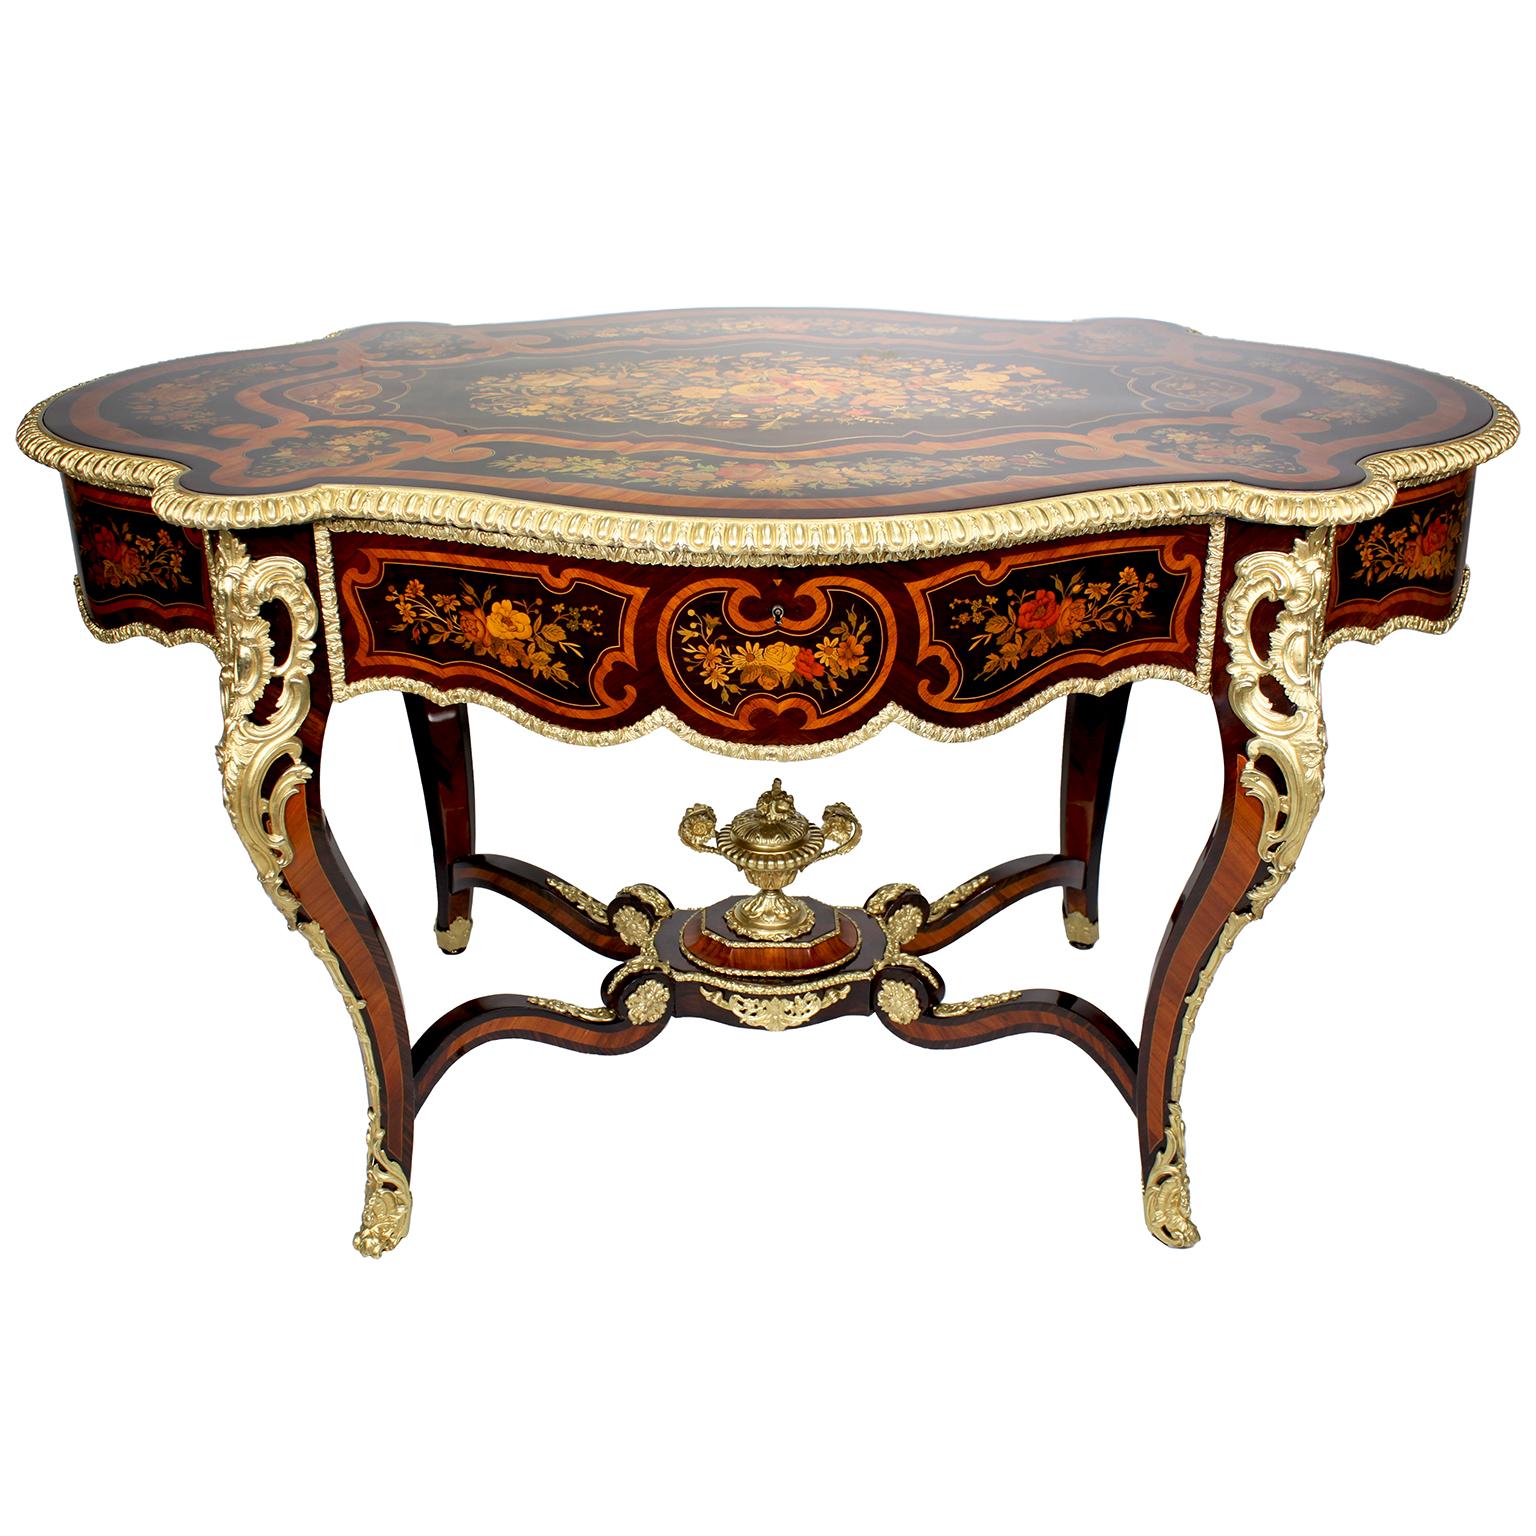 French 19th Century Louis XV Style Gilt-Bronze Mounted Marquetry Center Table In Good Condition For Sale In Los Angeles, CA